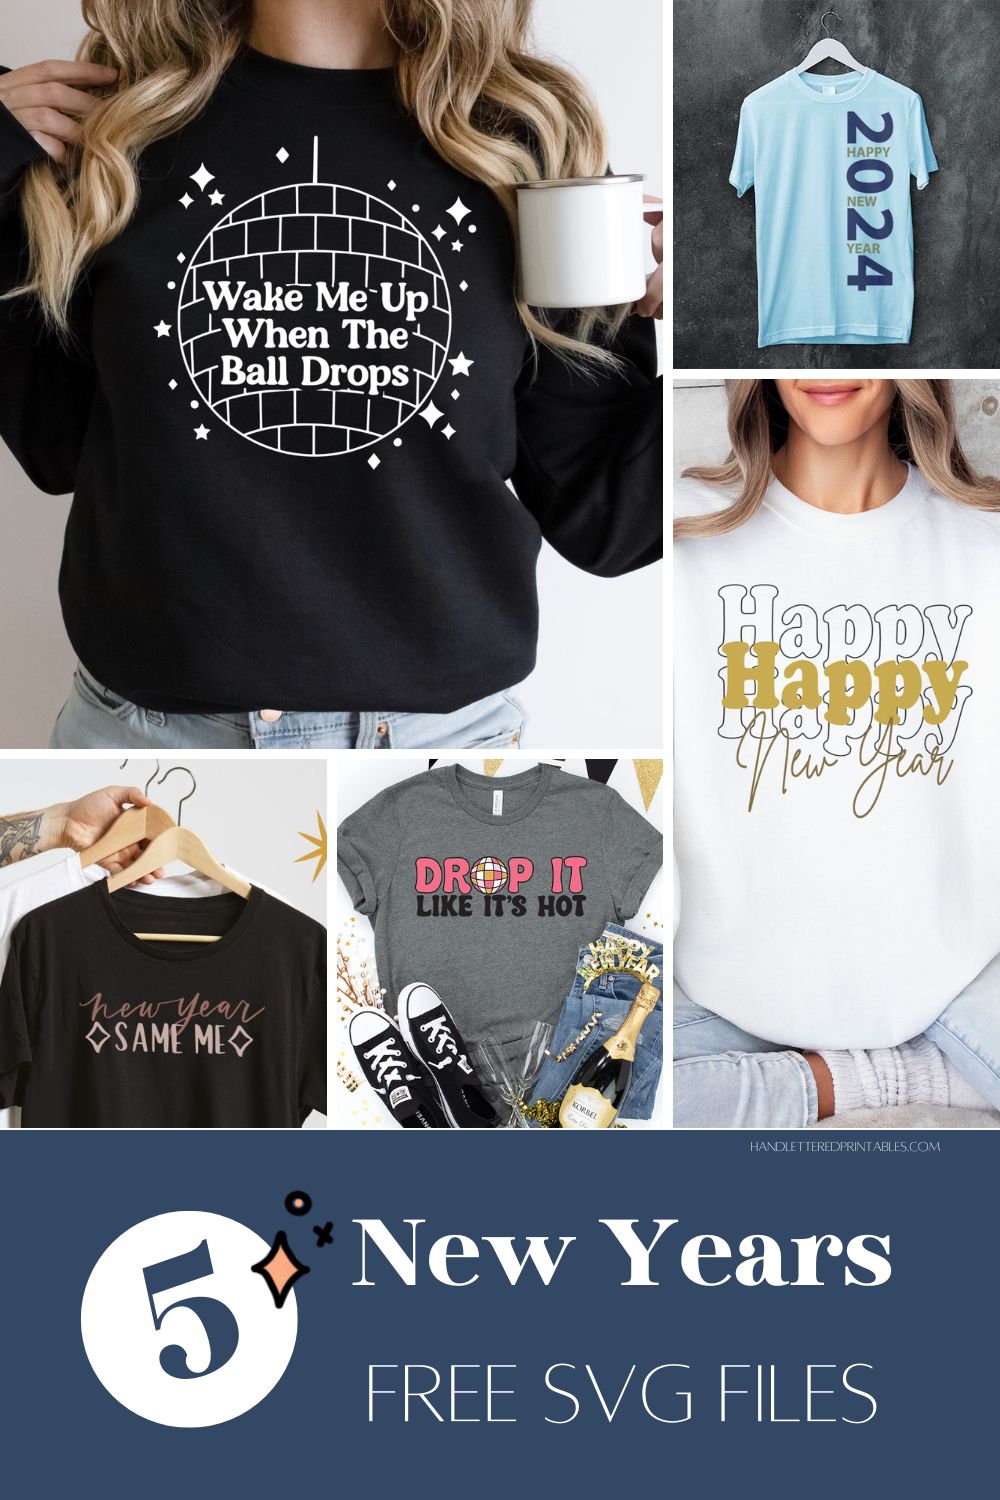 New Years SVG Files - collage of designs on shirts